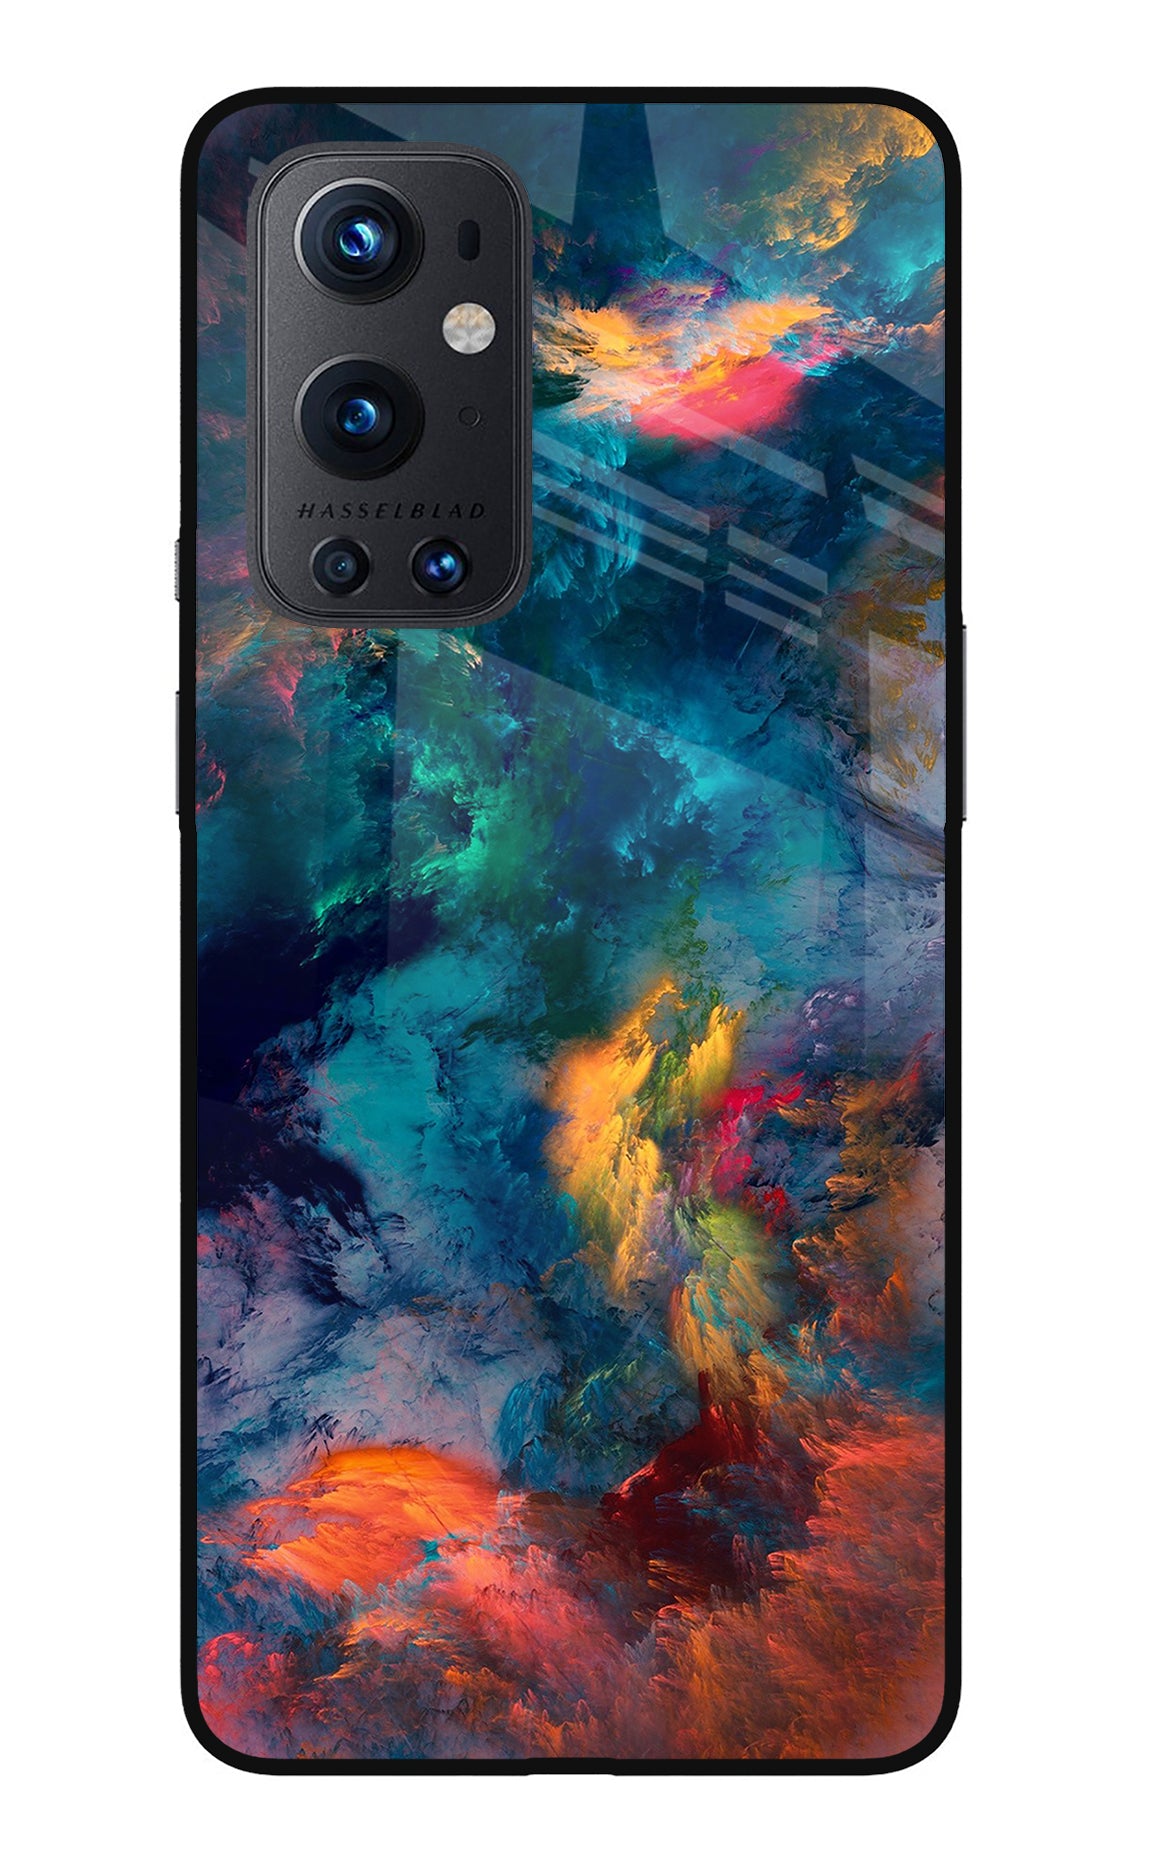 Artwork Paint Oneplus 9 Pro Back Cover